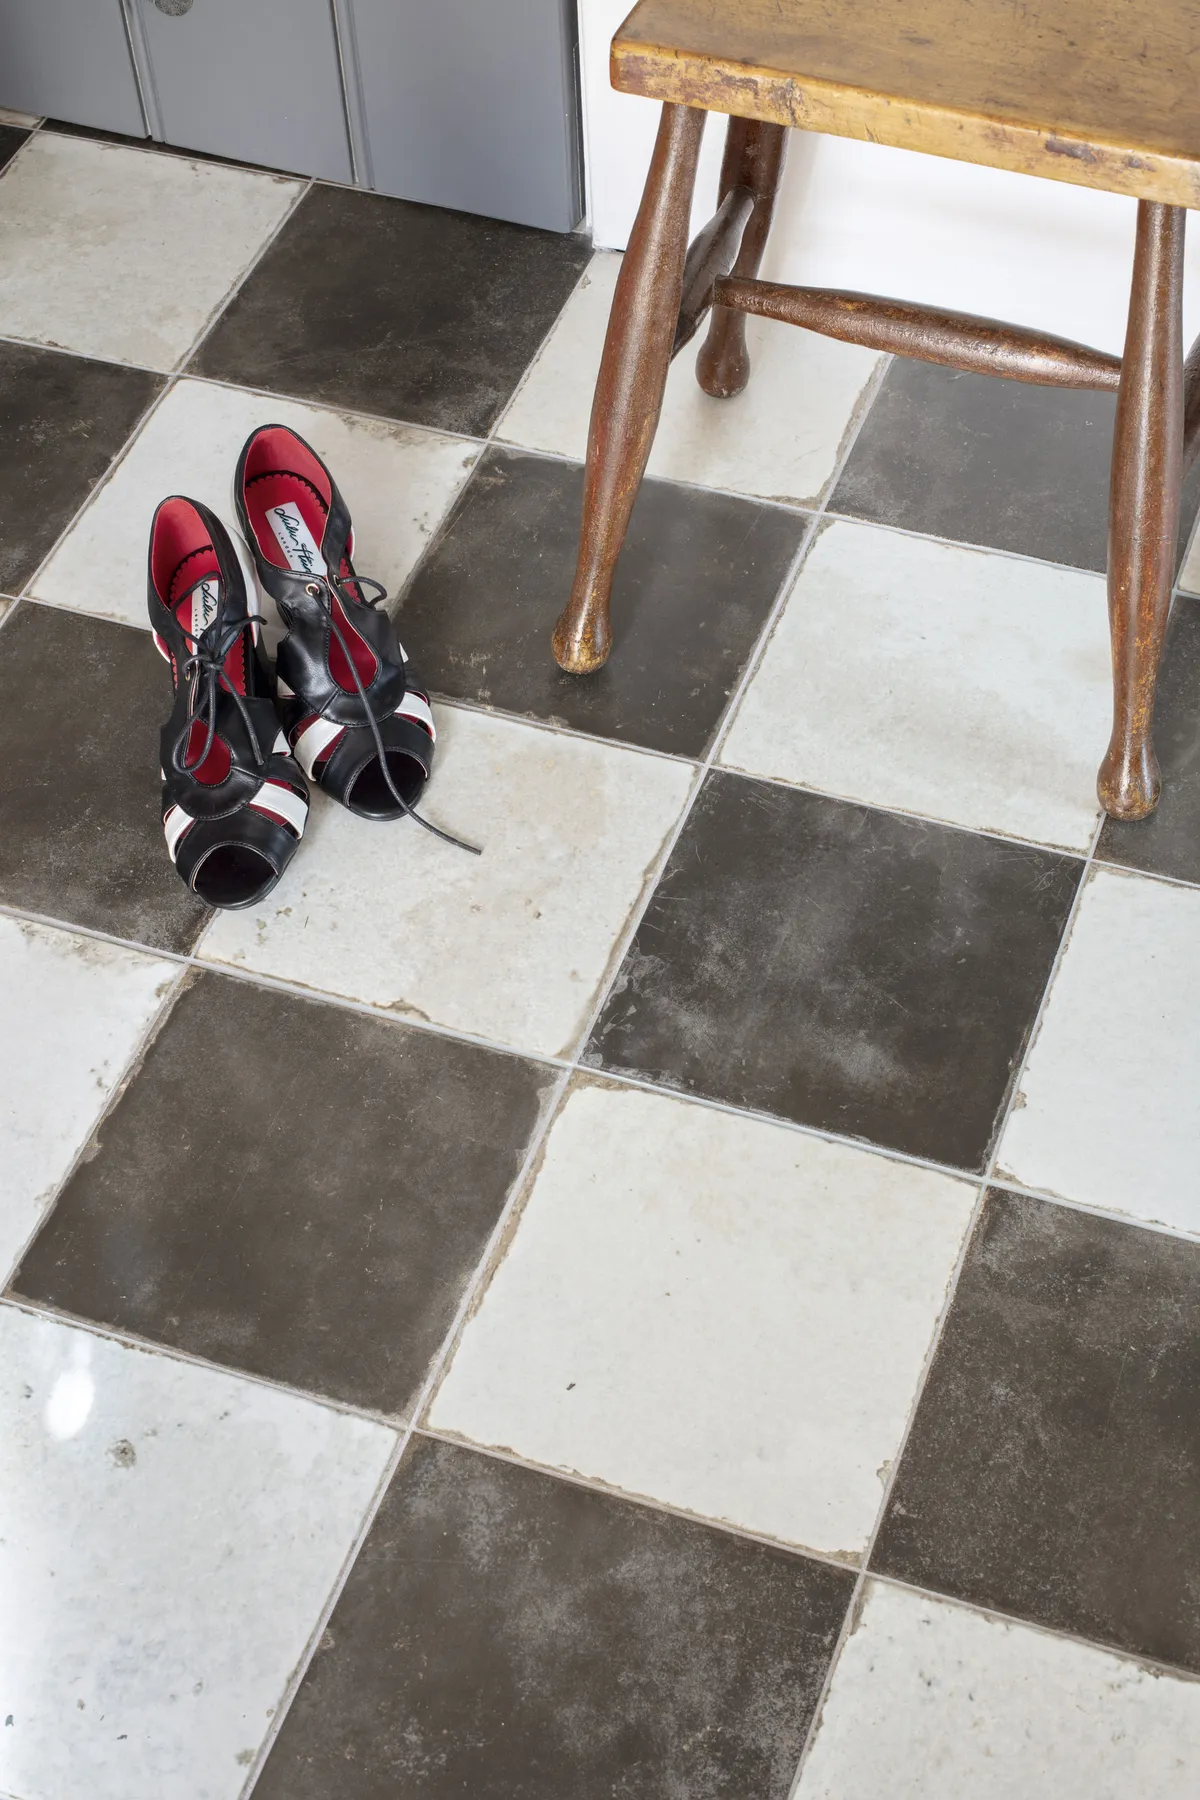 'These tiles are great because they have rough edges and look like they’ve been here for ages' says Sabrina